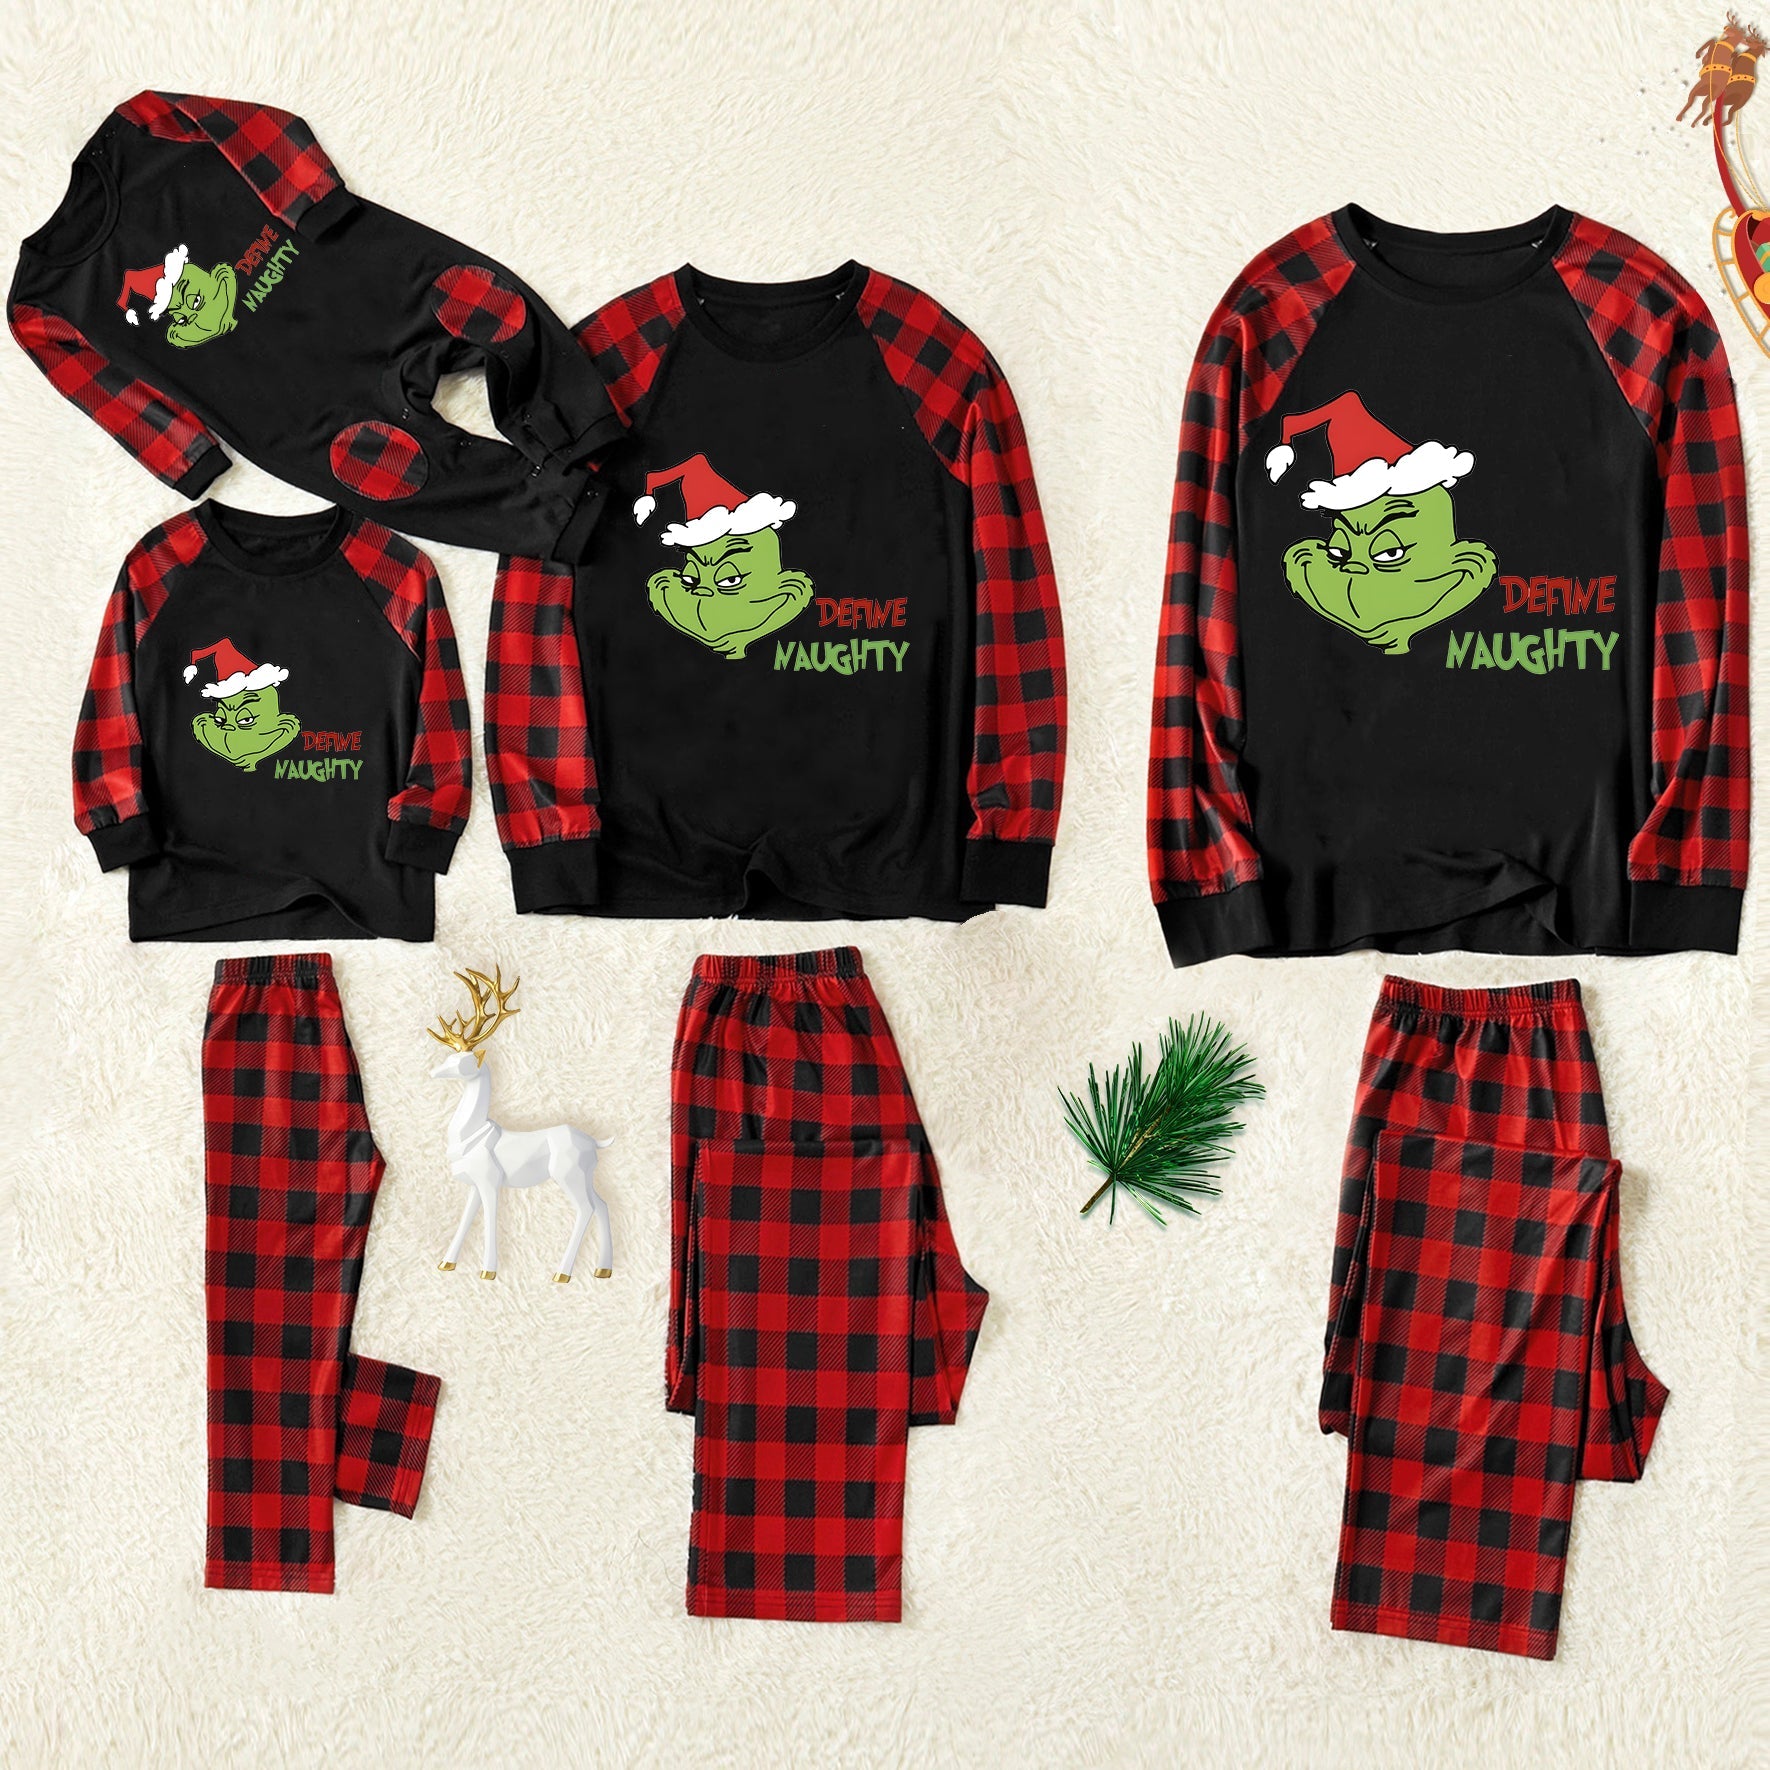 Christmas 'Define Naughty' Letter Print Patterned Casual Long Sleeve Sweatshirts Contrast Black Top and Black & Red Plaid Pants Family Matching Pajamas Set With Dog Bandana